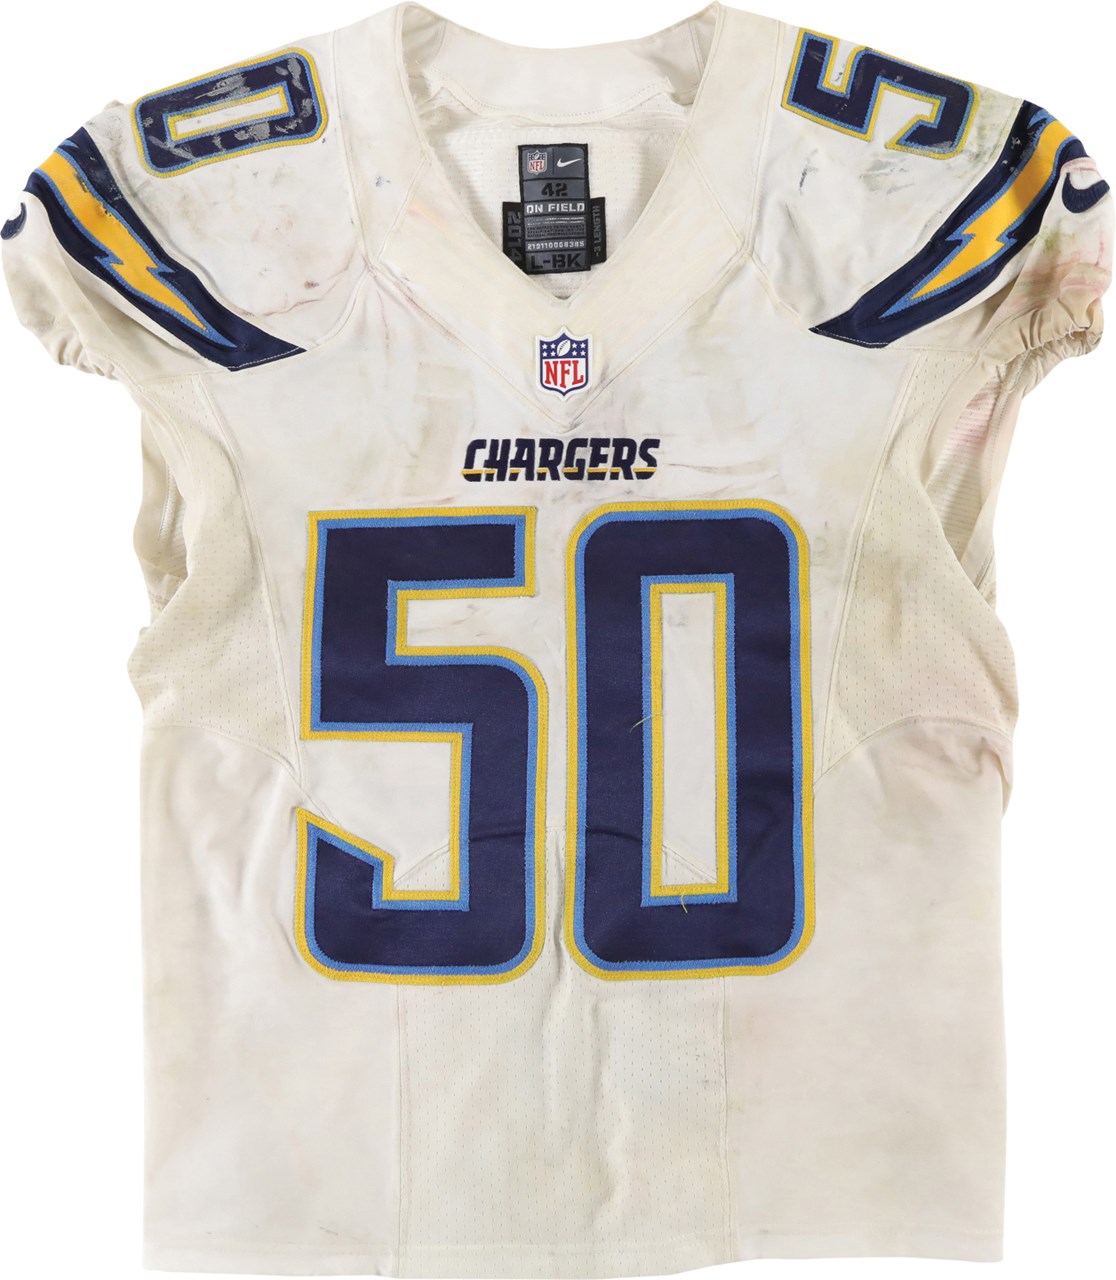 - 12/20/14 Manti Te'o San Diego Chargers Game Worn Jersey (MeiGray Photo-Matched)